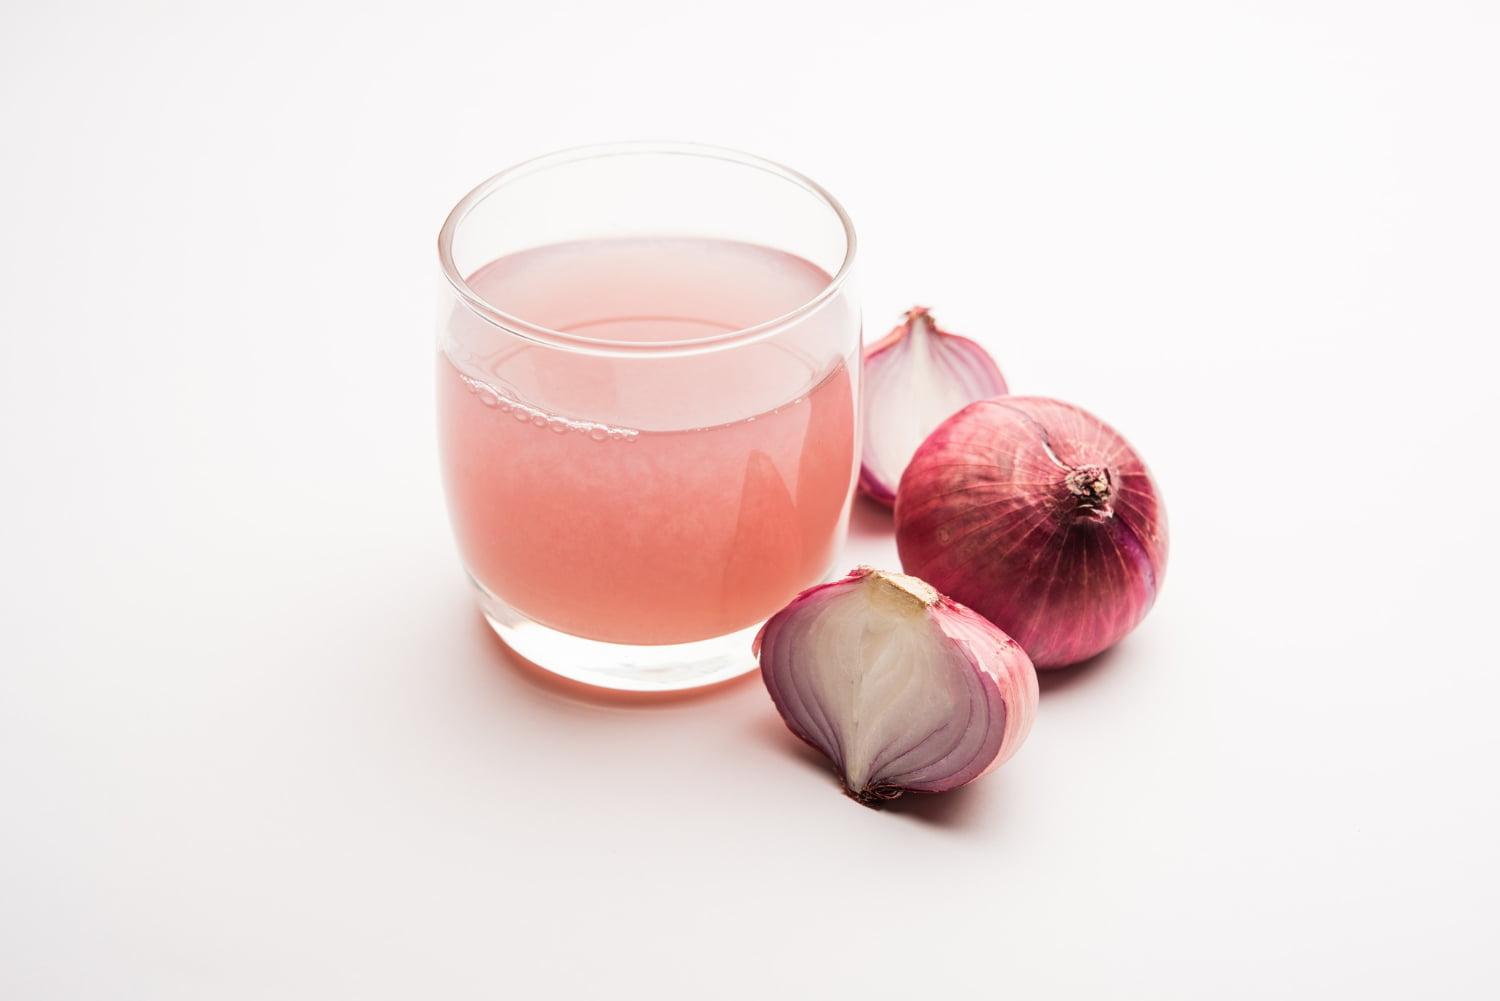 medicinal onion juice syrup glass with raw onions selective focus